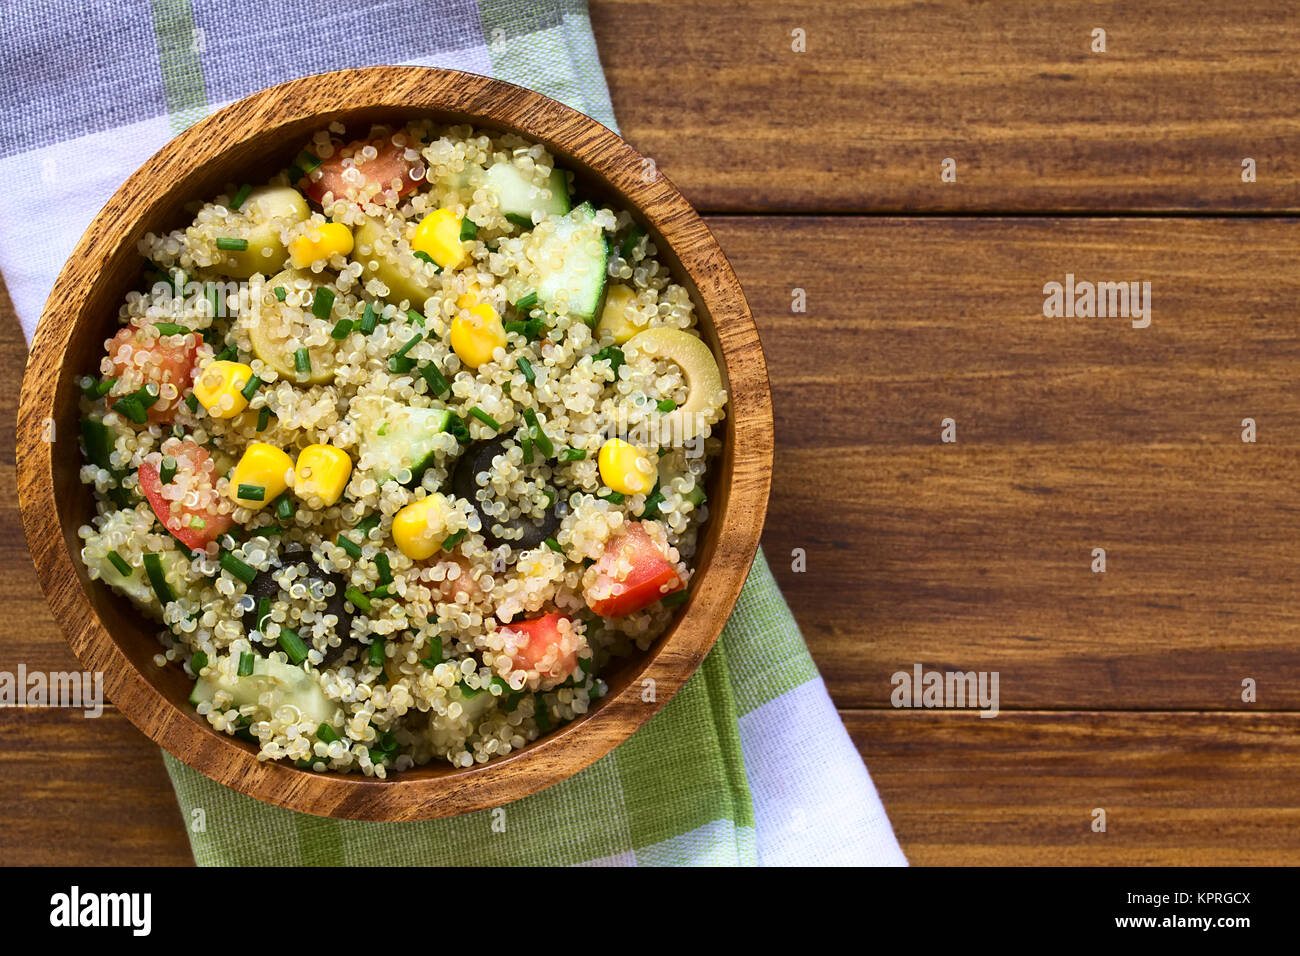 Colorful Quinoa and Vegetable Salad Stock Photo - Alamy